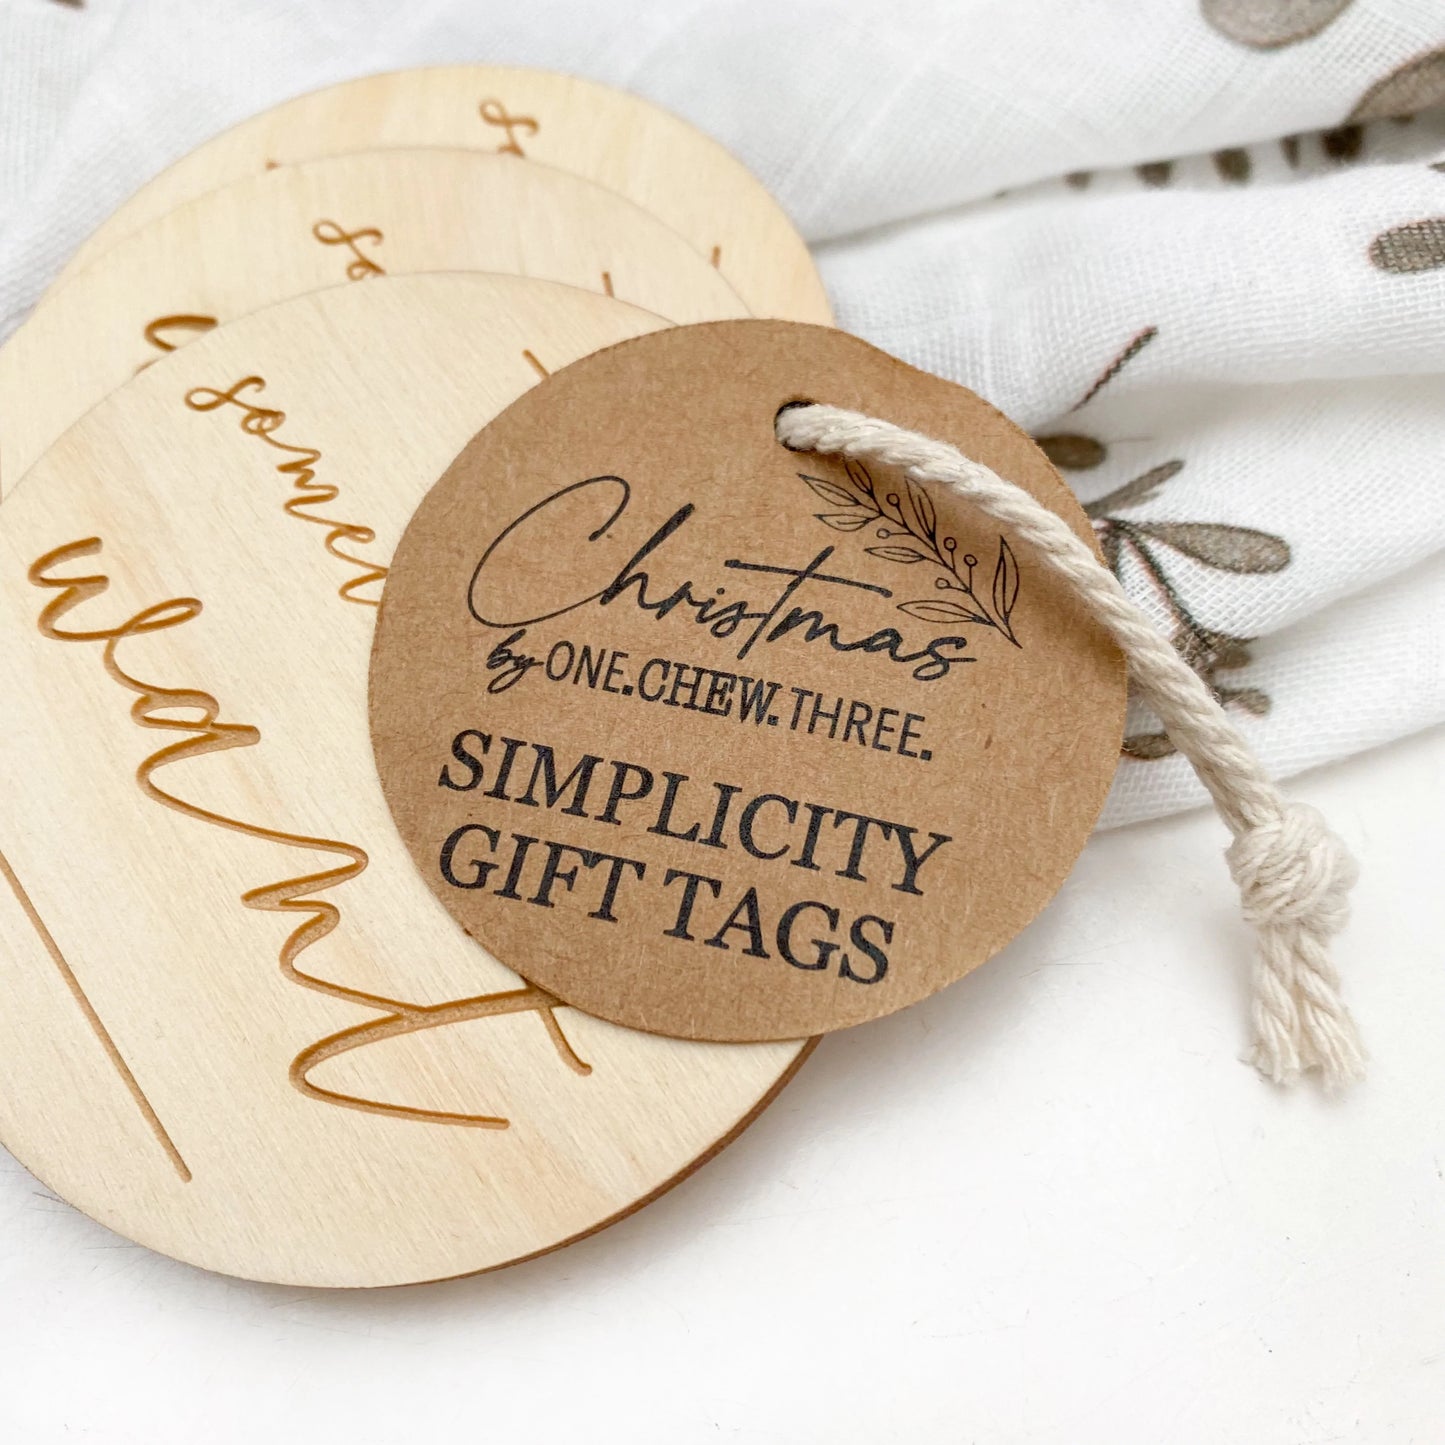 Mindful Gifting Tags - Star